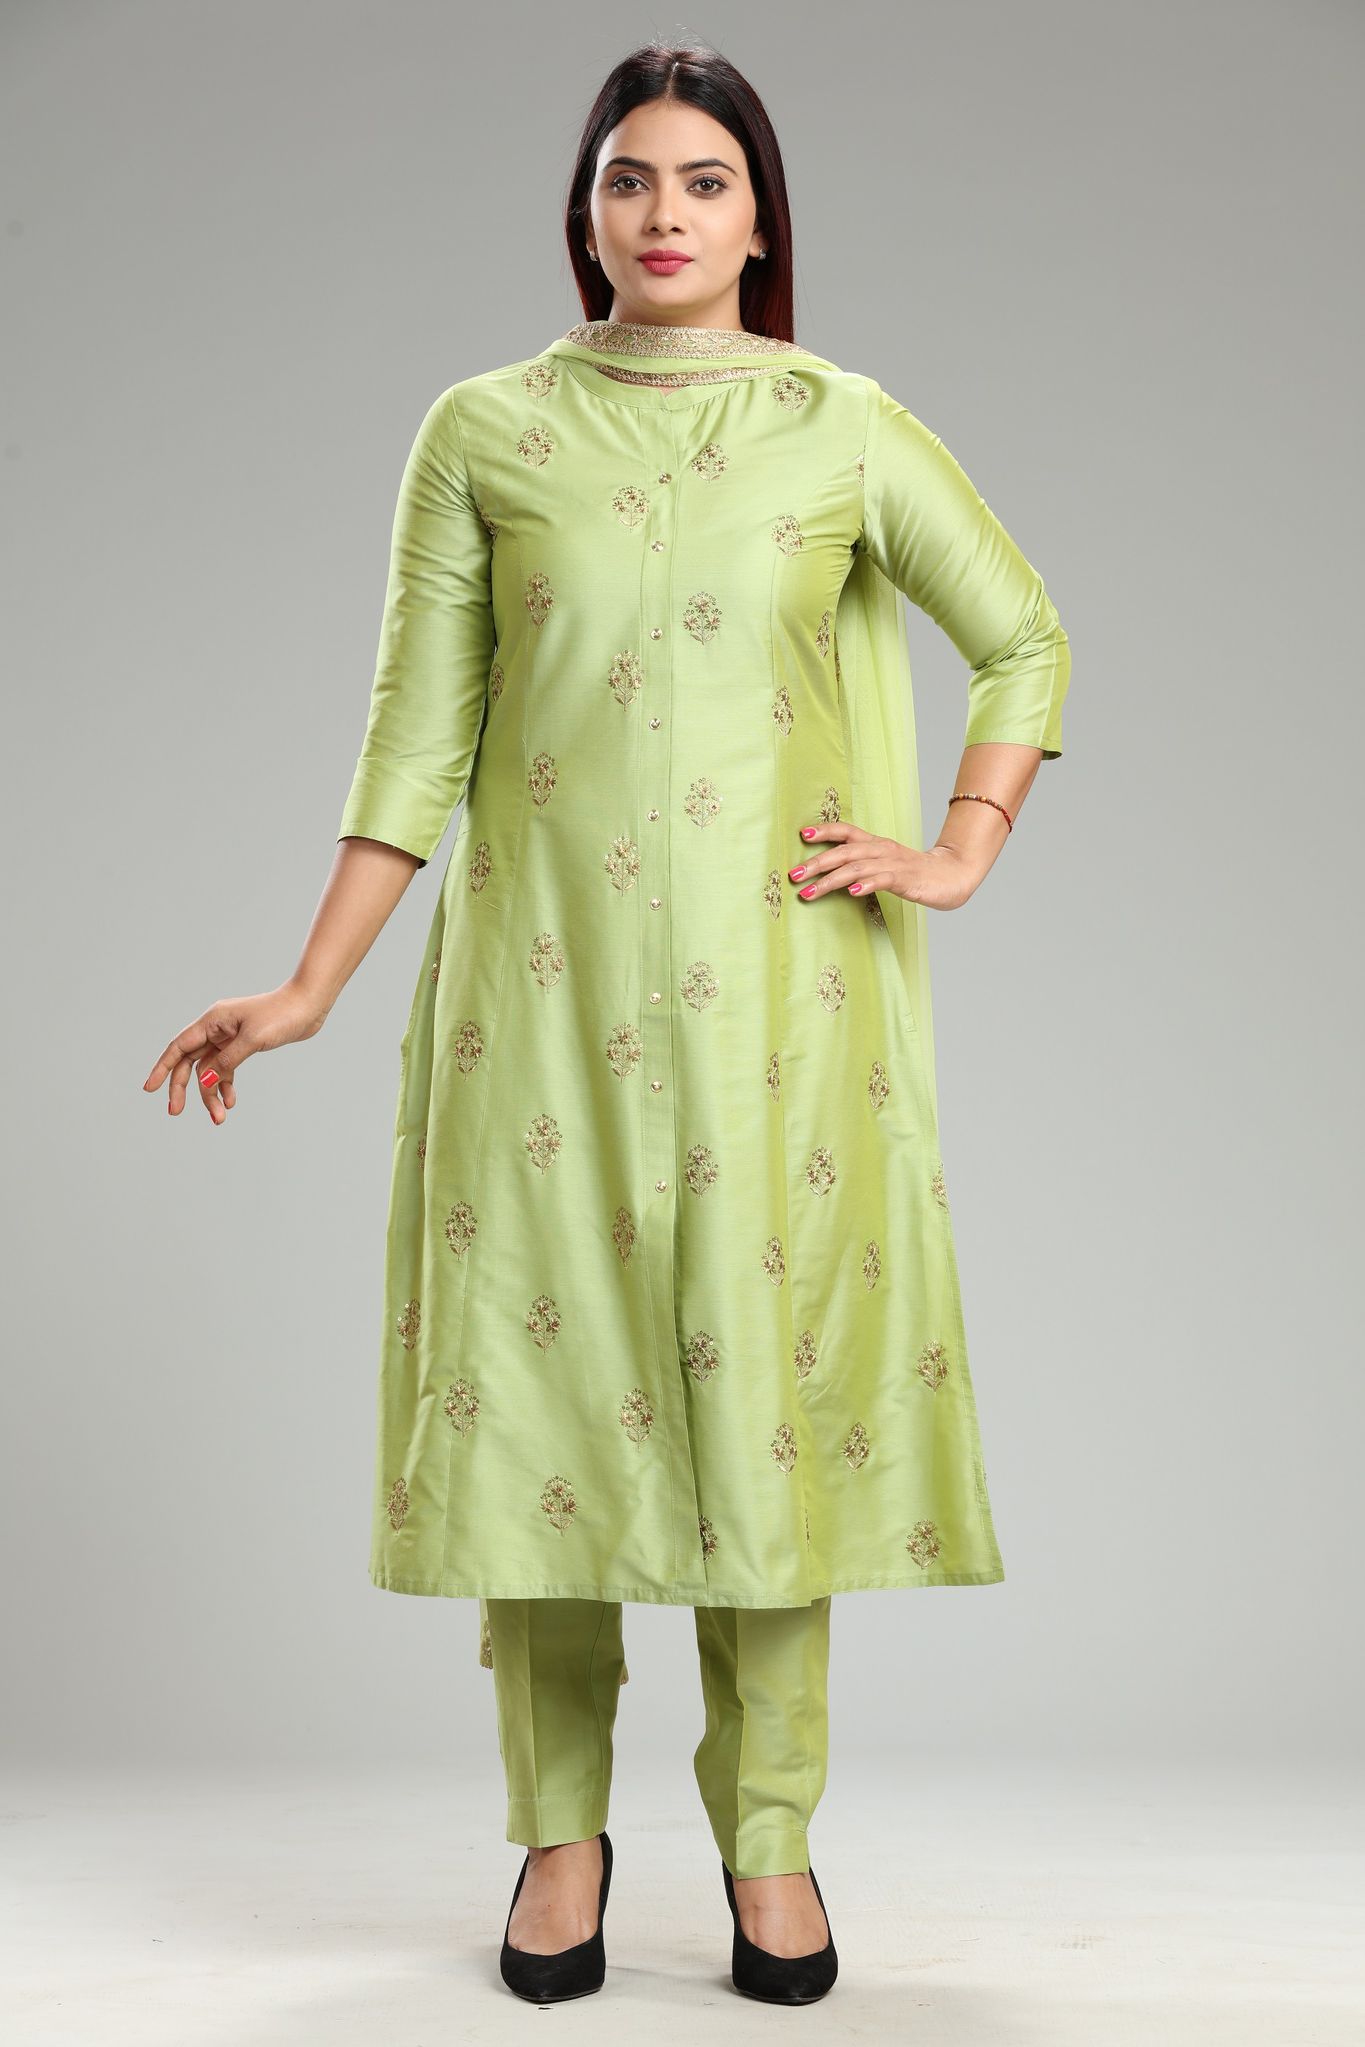 Idhitri CC5 Parrot Green Cotton Silk Embroidered Suit Set